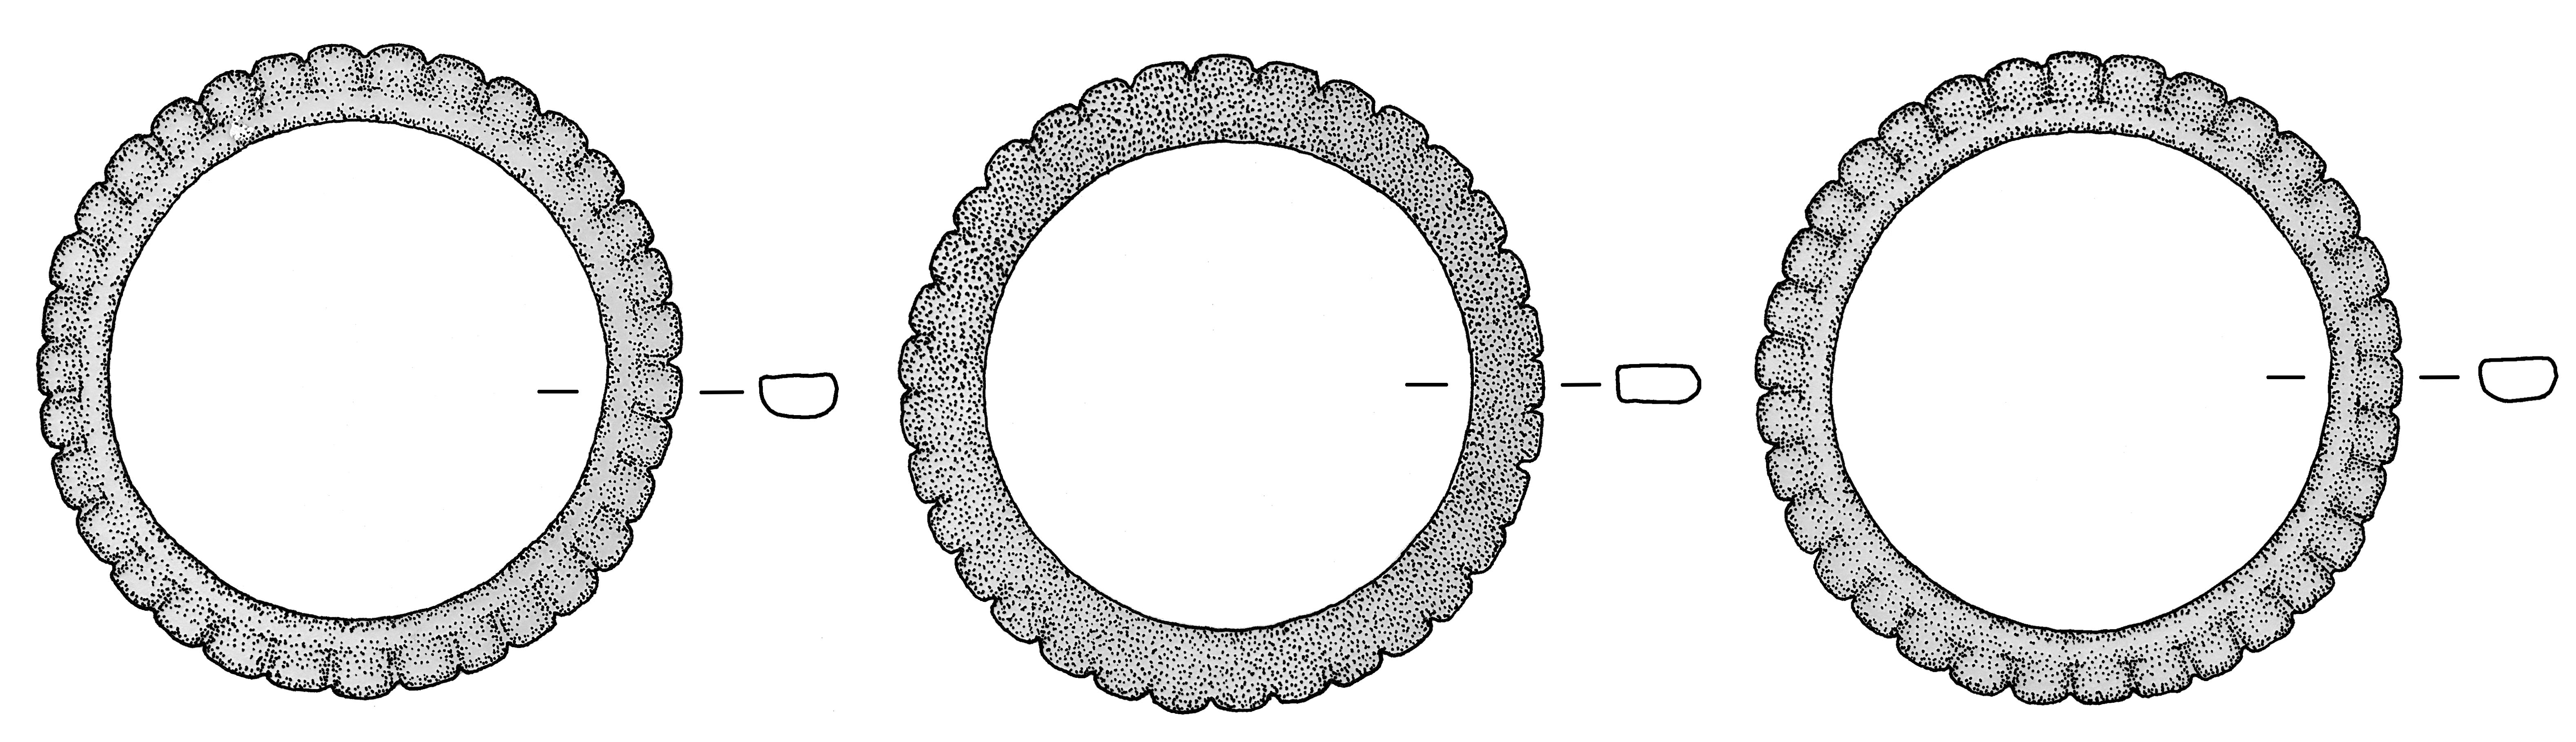 BC 0708A/1594<br>outer diameter=6.8 cm
inner diameter=5.1 cm
shaft height=0.4 cm
shaft width=0.8 cm
scalloped edges
Object is one of three rings: one ring has flat top and bottom surfaces, two rings have one flat and one convex surface, allowing the rings to fit together as a set. Knobs are 0.5 cm. 